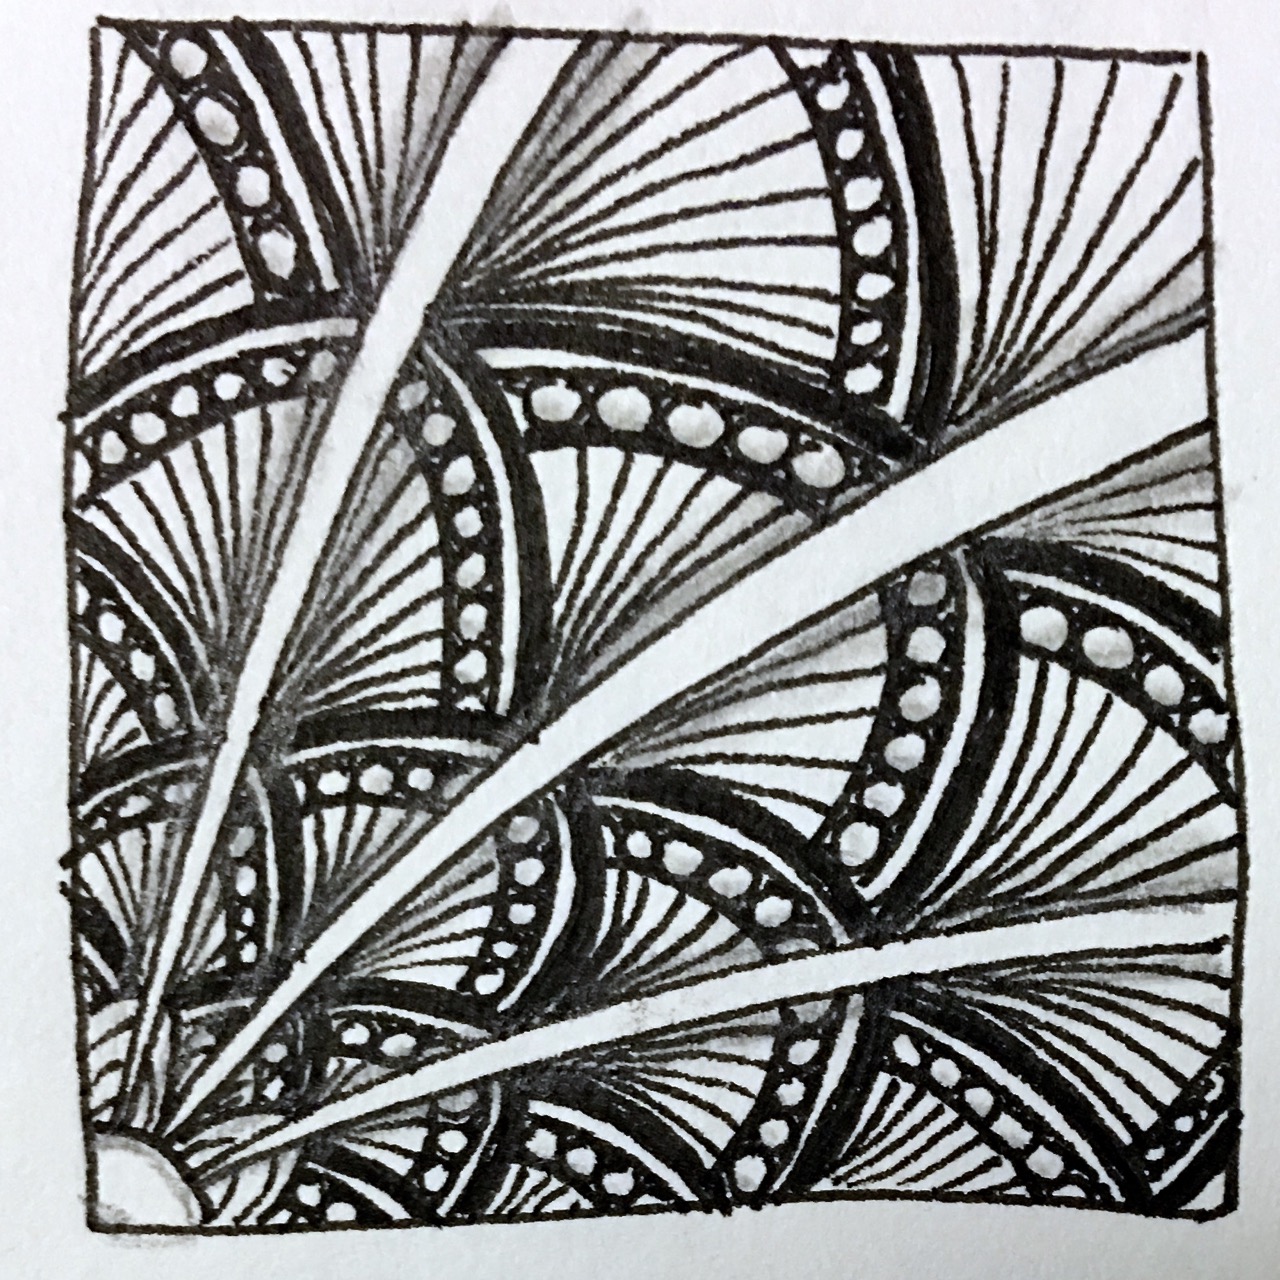 Step by step tutorial on how to draw Zentangle artwork